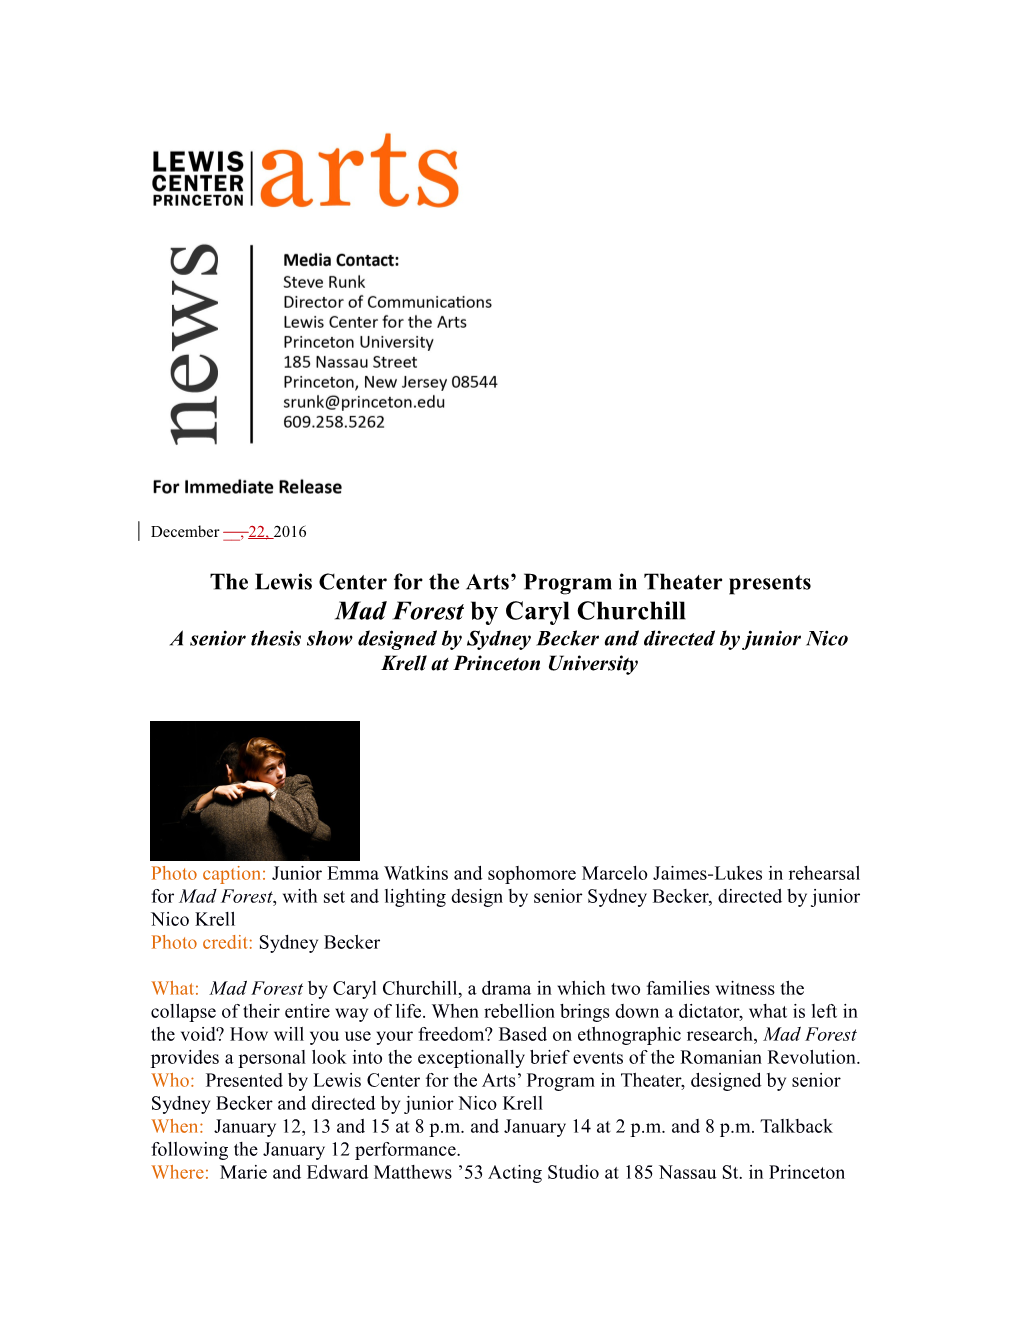 The Lewis Center for the Arts Program in Theater Presents